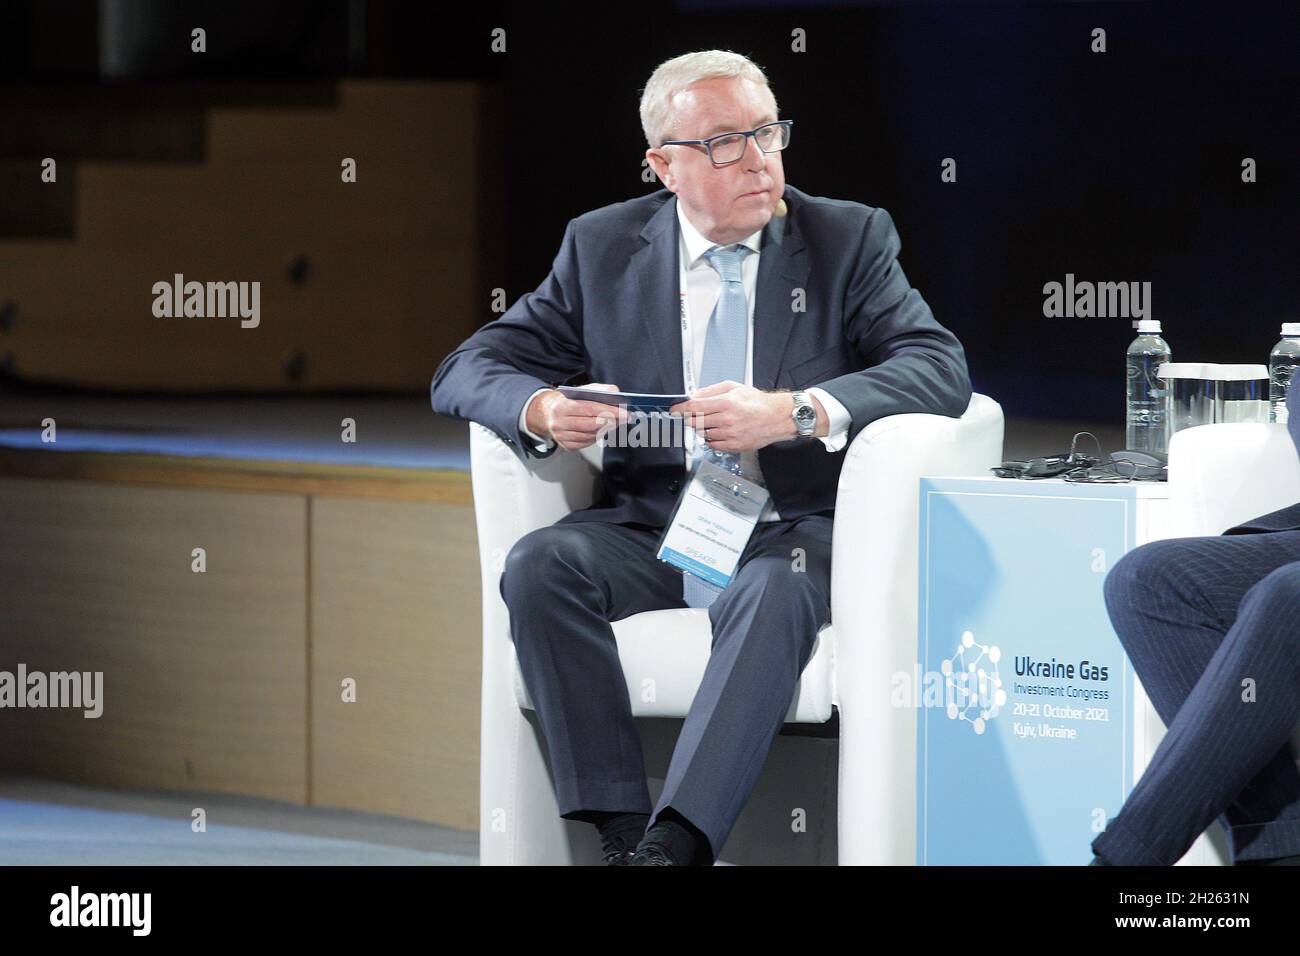 Non Exclusive: KYIV, UKRAINE - OCTOBER 20, 2021 - Chief Operating Officer and Head of Advisory at KPMG Sean Tiernan moderates the Redefining Ukraine&# Stock Photo